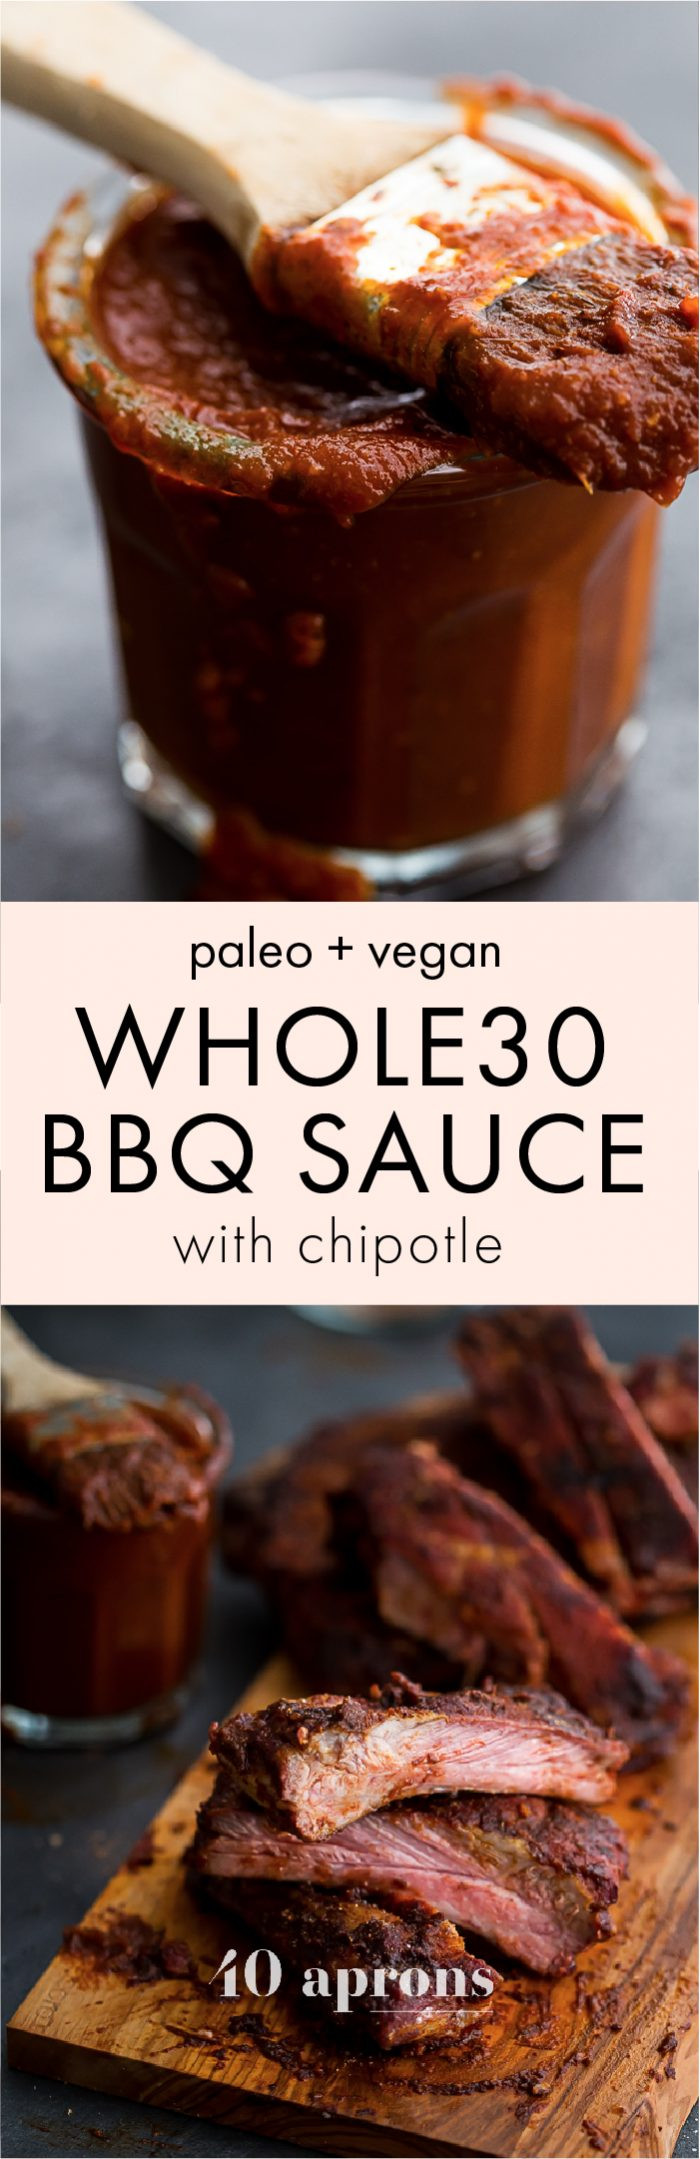 Whole30 Bbq Sauce Recipe
 Whole30 BBQ Sauce With Chipotle Paleo Vegan 40 Aprons